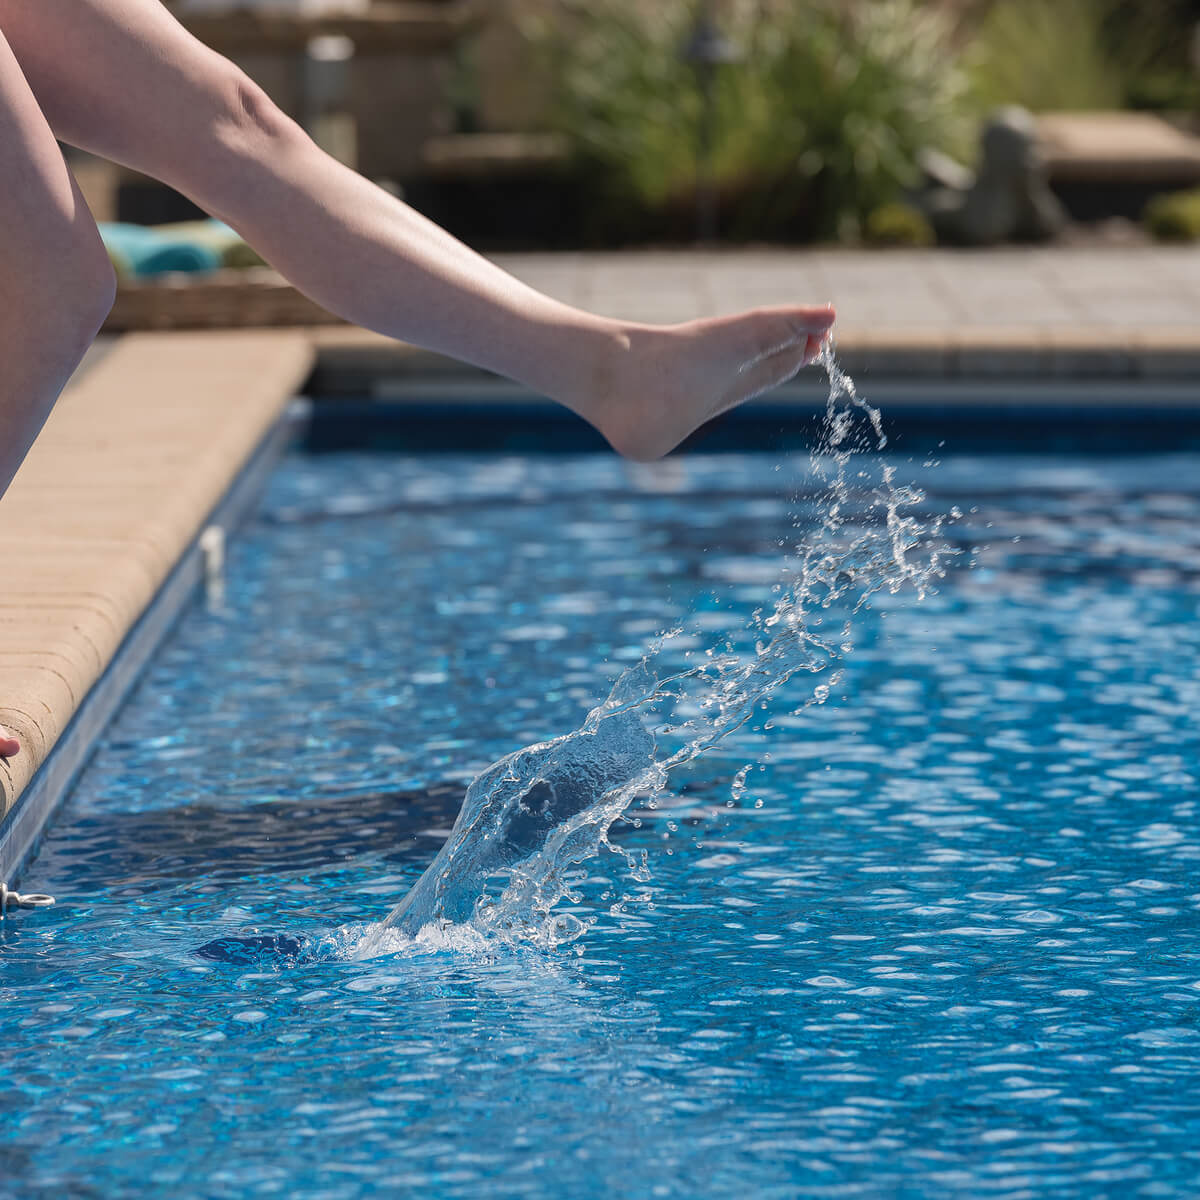 Close up of Person Dipping Foot into Pool with Unilock Coping